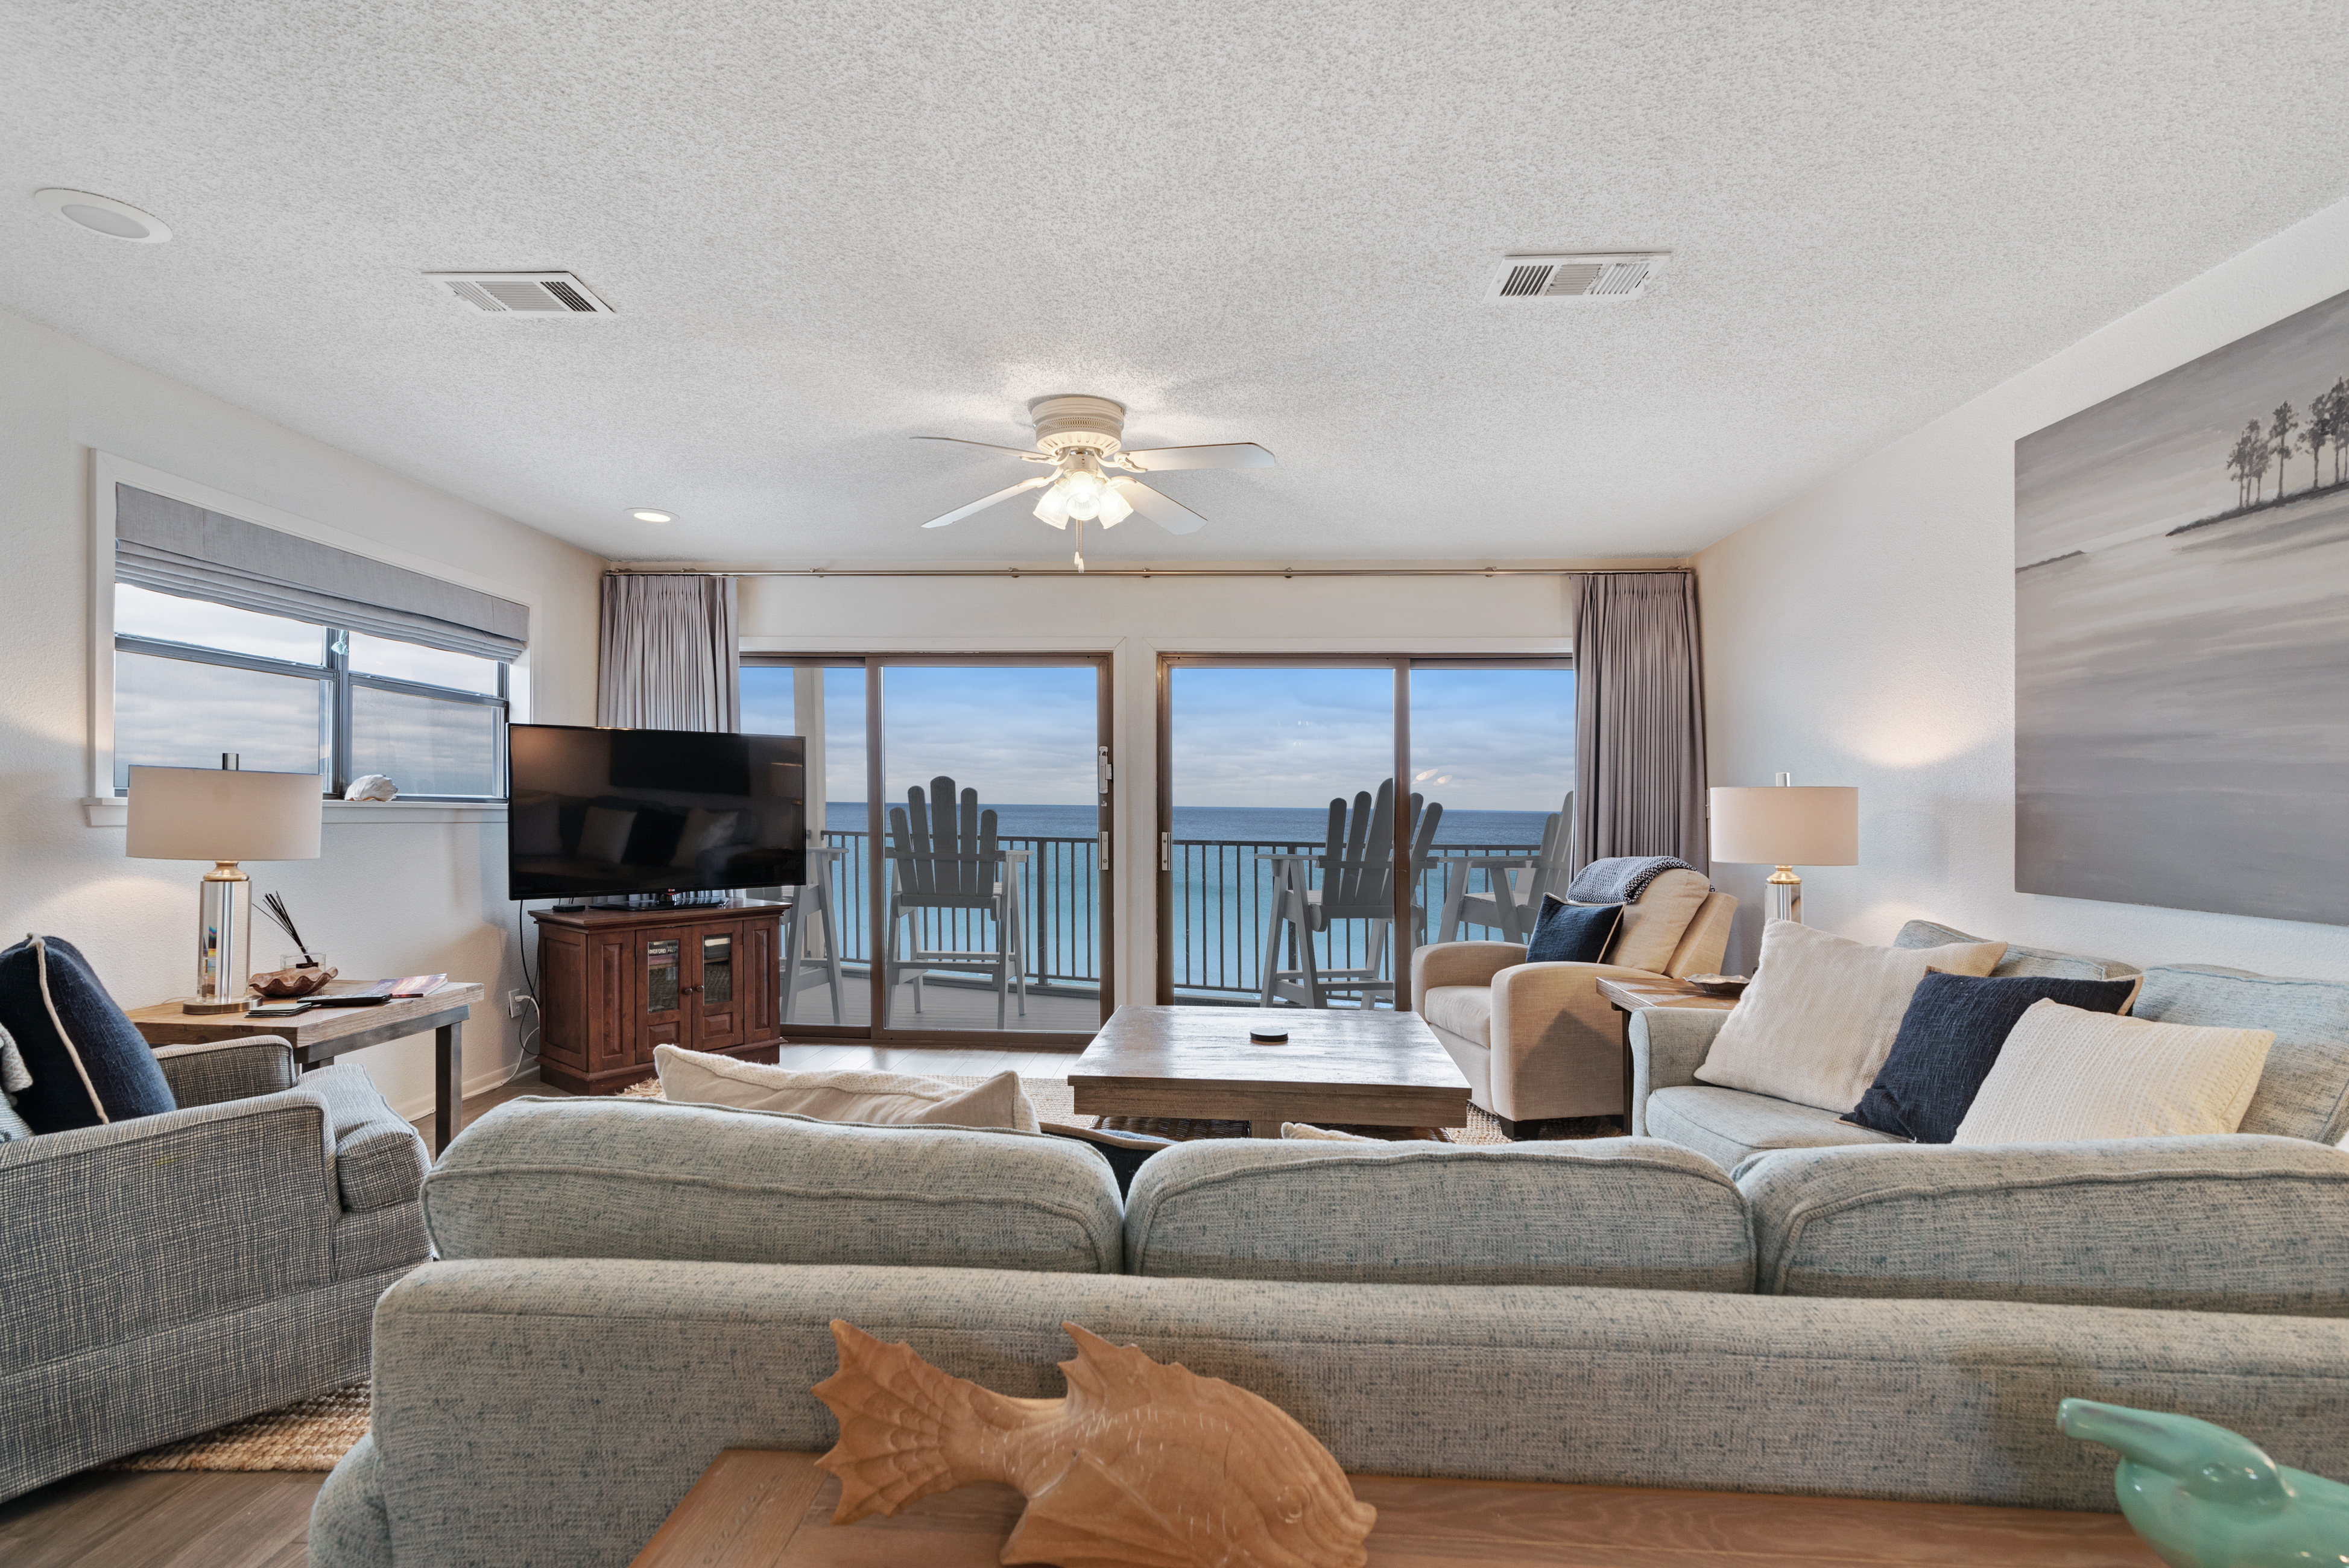 Blue Mountain Beach - 216 Blue Mountain Road Unit 1B Condo rental in Other 30a Condo Rentals in Highway 30-A Florida - #3